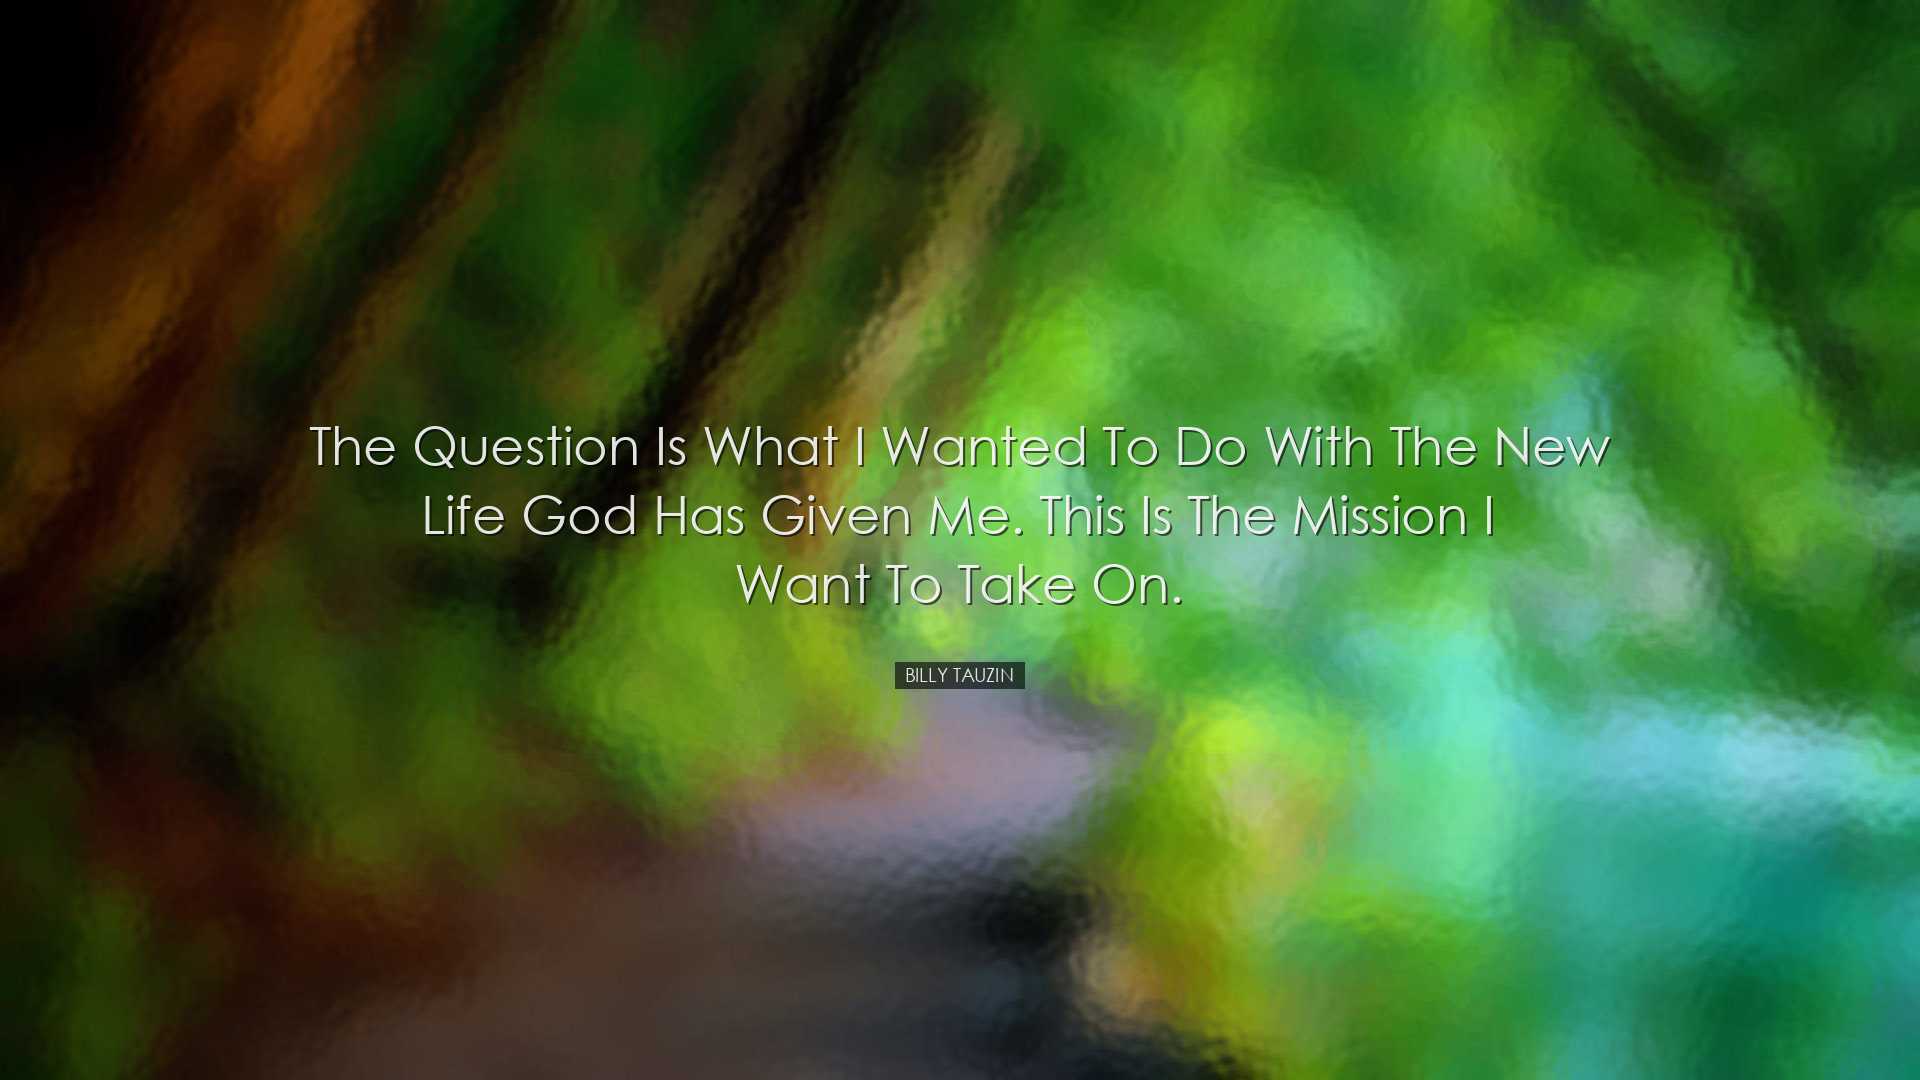 The question is what I wanted to do with the new life God has give